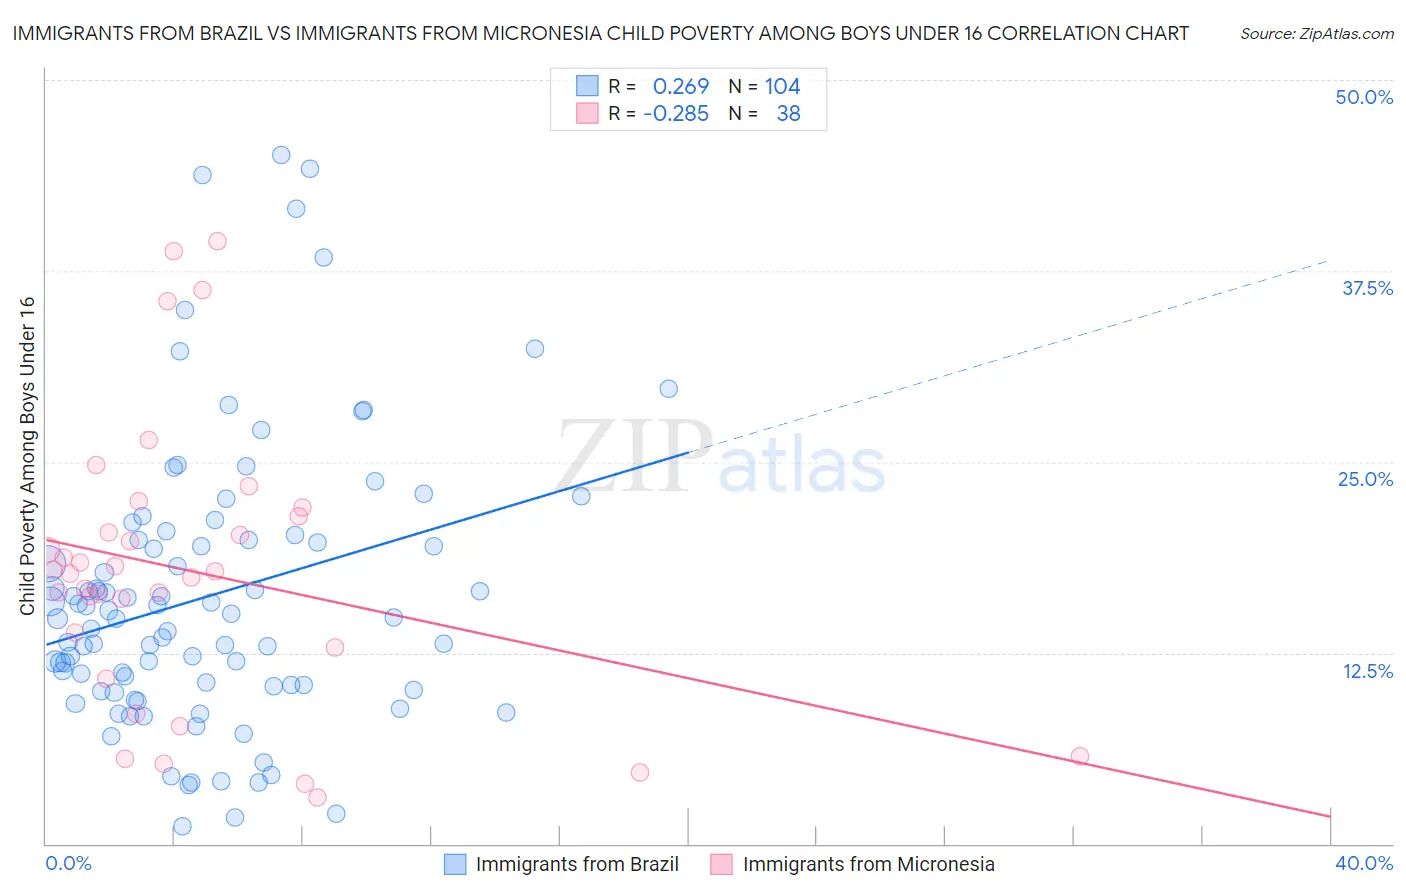 Immigrants from Brazil vs Immigrants from Micronesia Child Poverty Among Boys Under 16